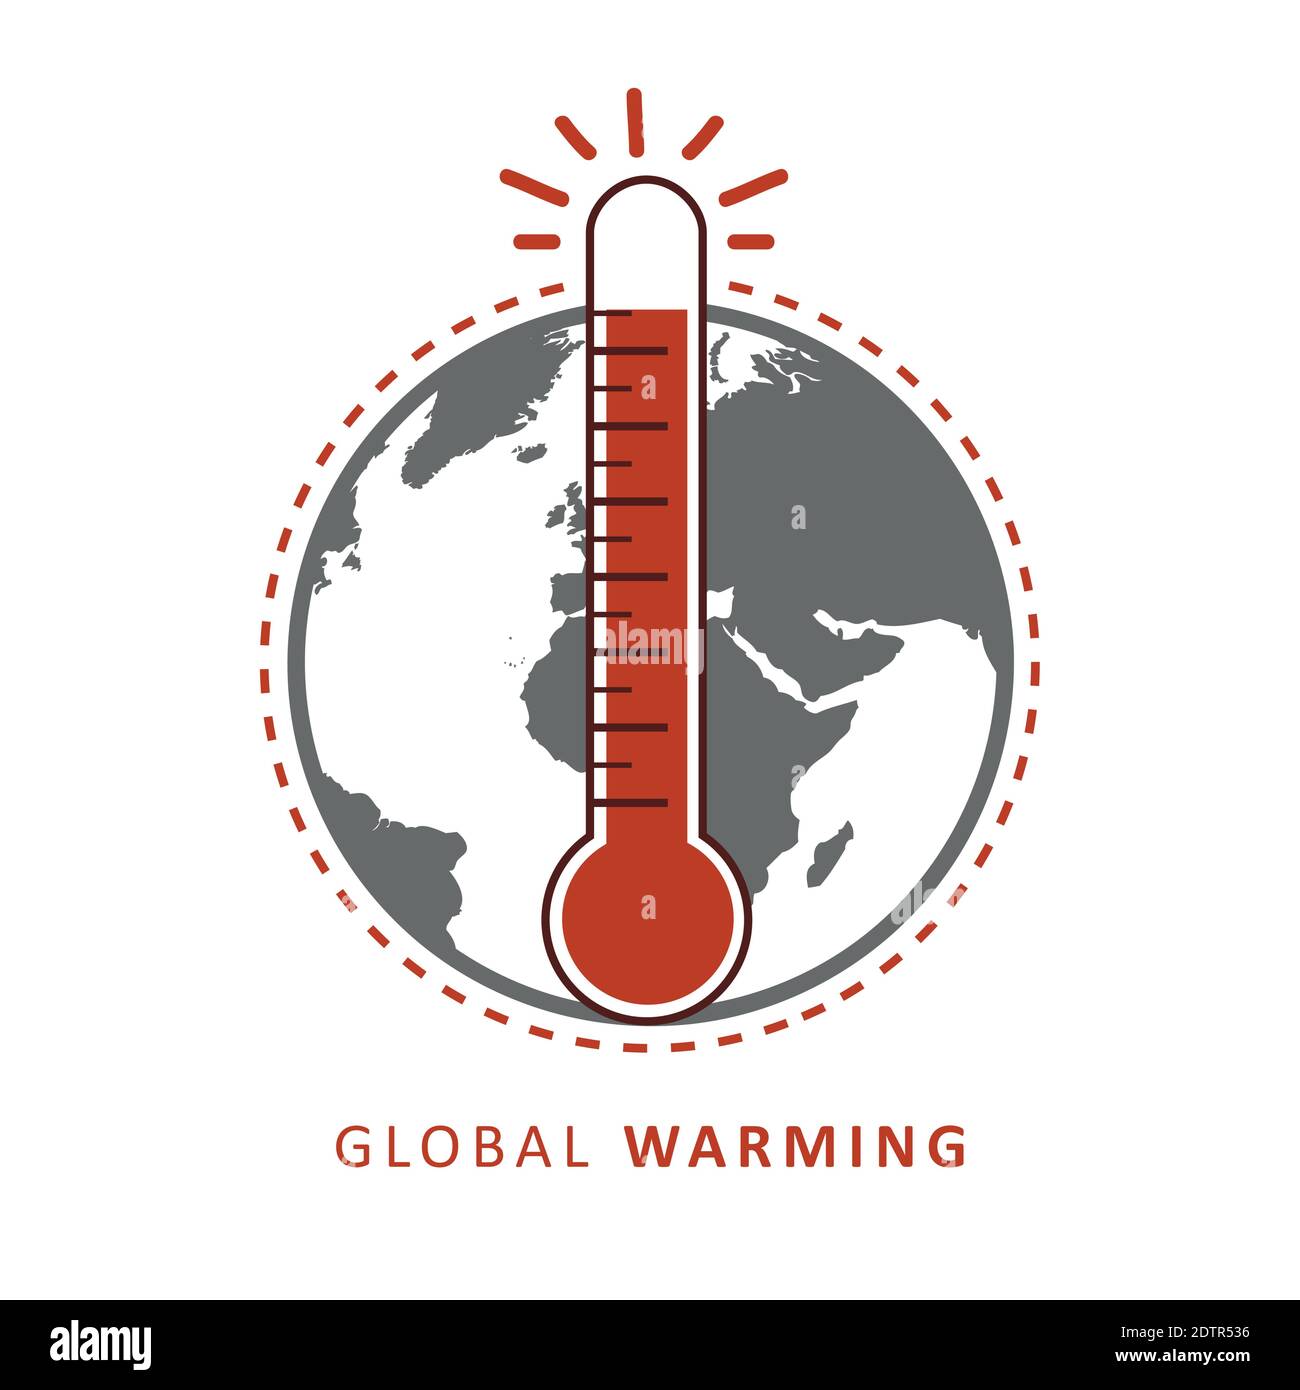 Global warming Stock Vector Images - Alamy